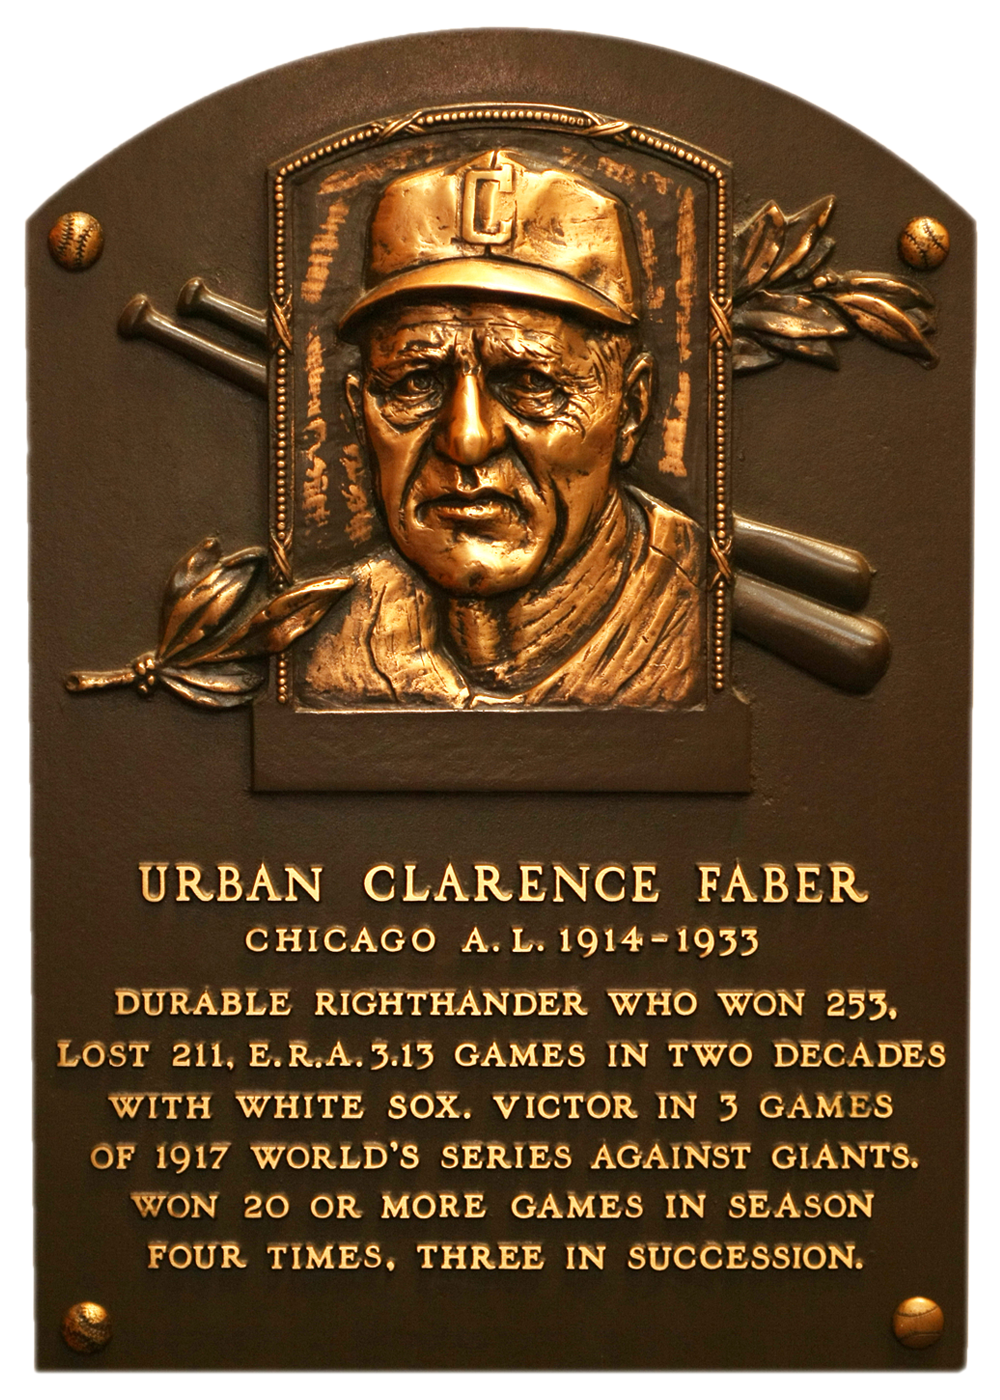 Red Faber Hall of Fame plaque